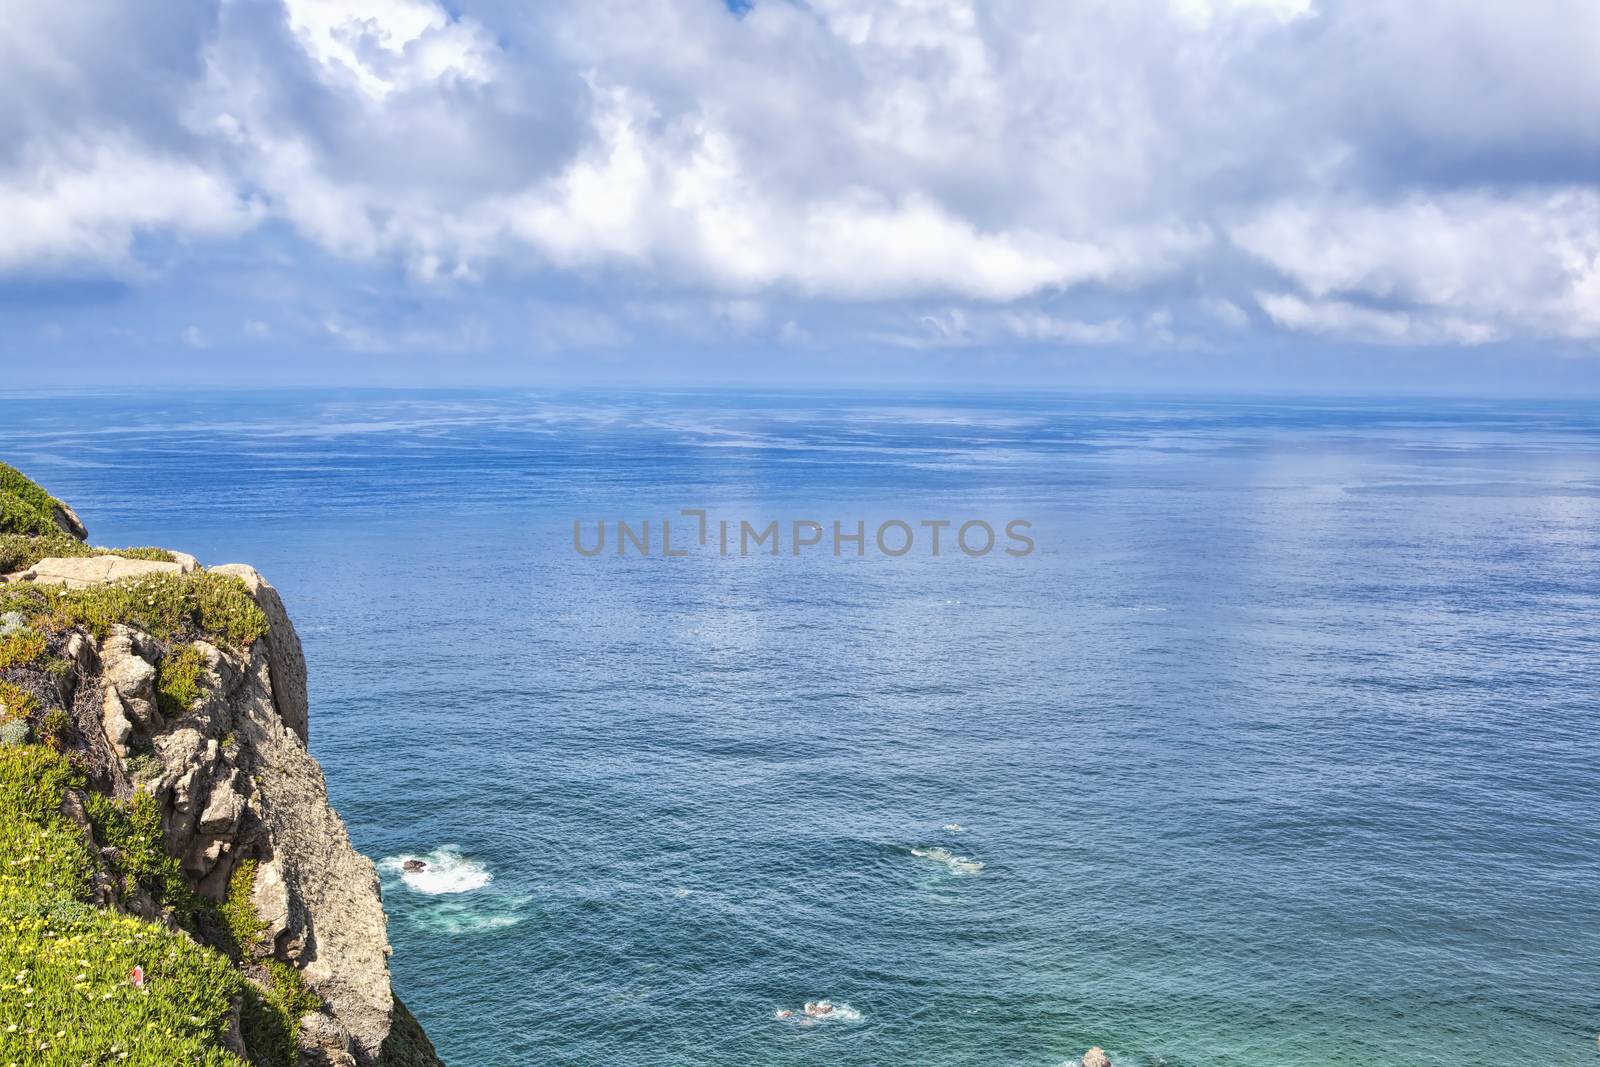 Cape Roca, West most point of Europe, Portugal